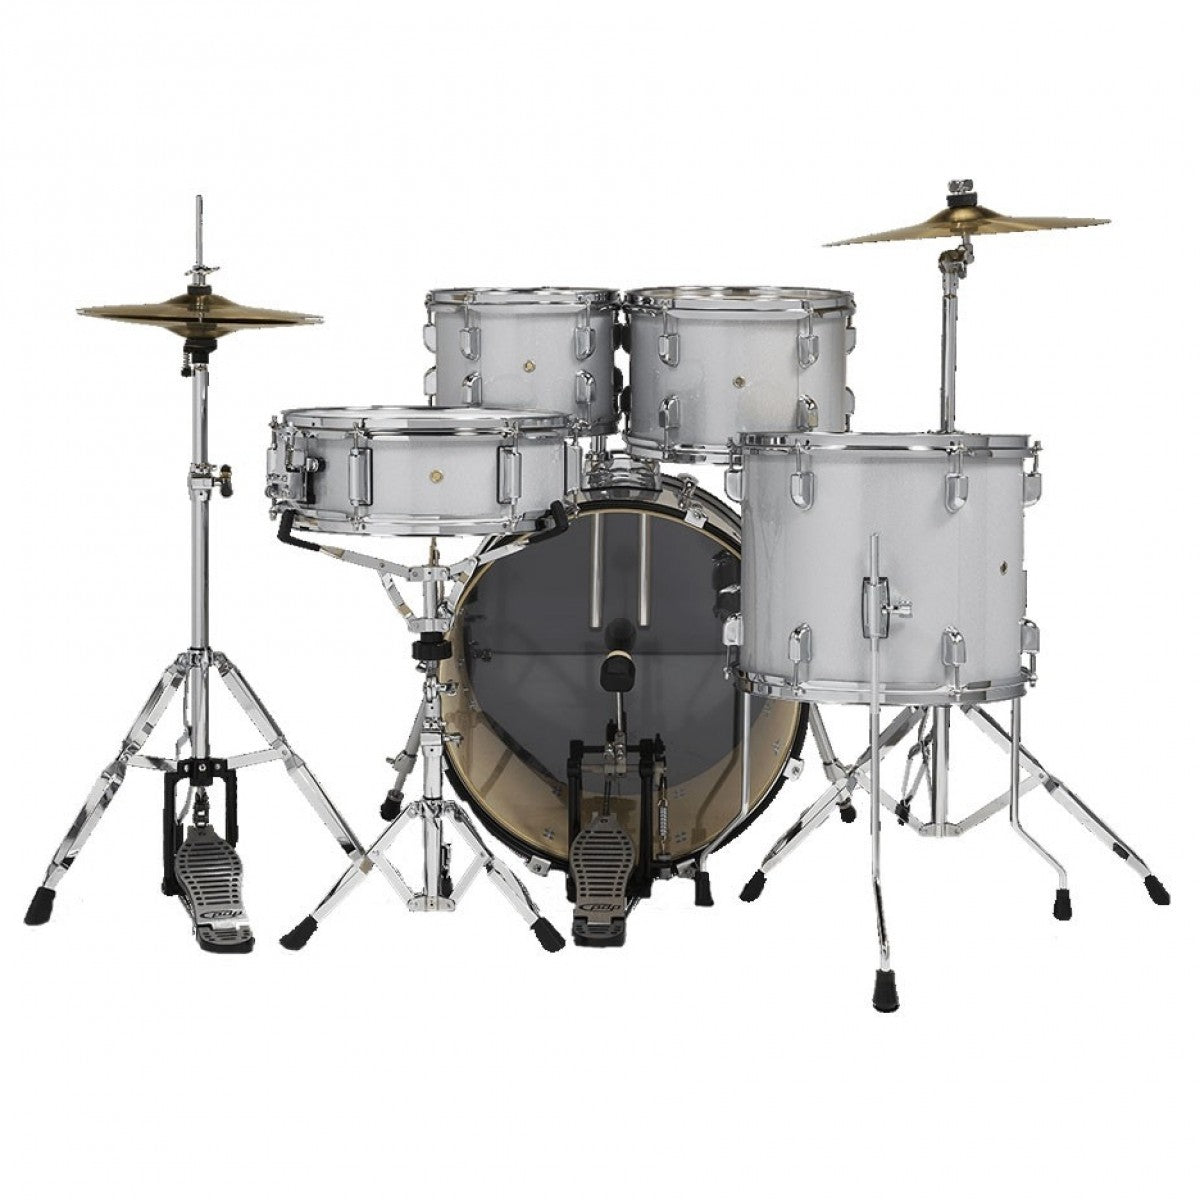 PDP by DW Center Stage 22" Rock/Fusion Drum Kit